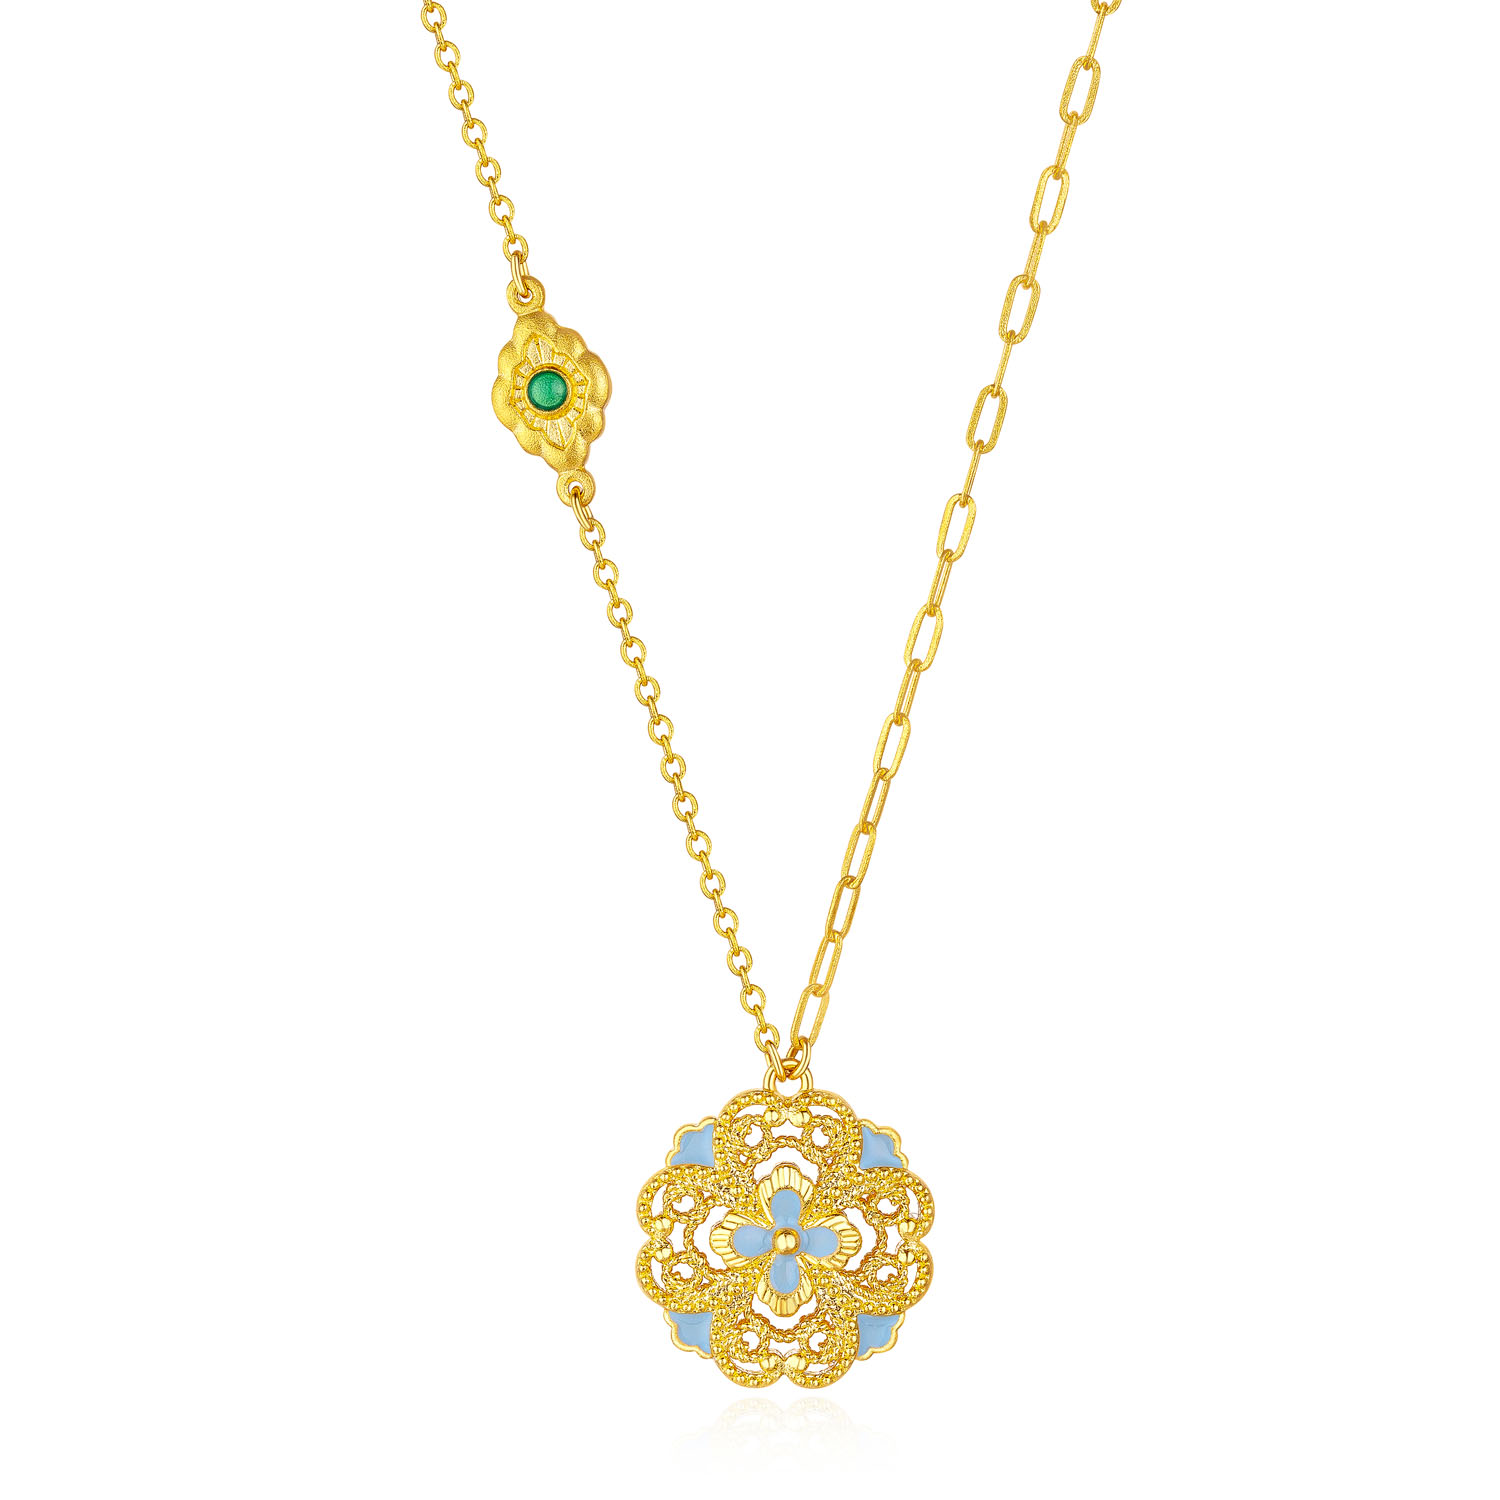 Heirloom Fortune - Charm of Song Dynasty Collection "Blue Floral Rhythm" Gold Necklace